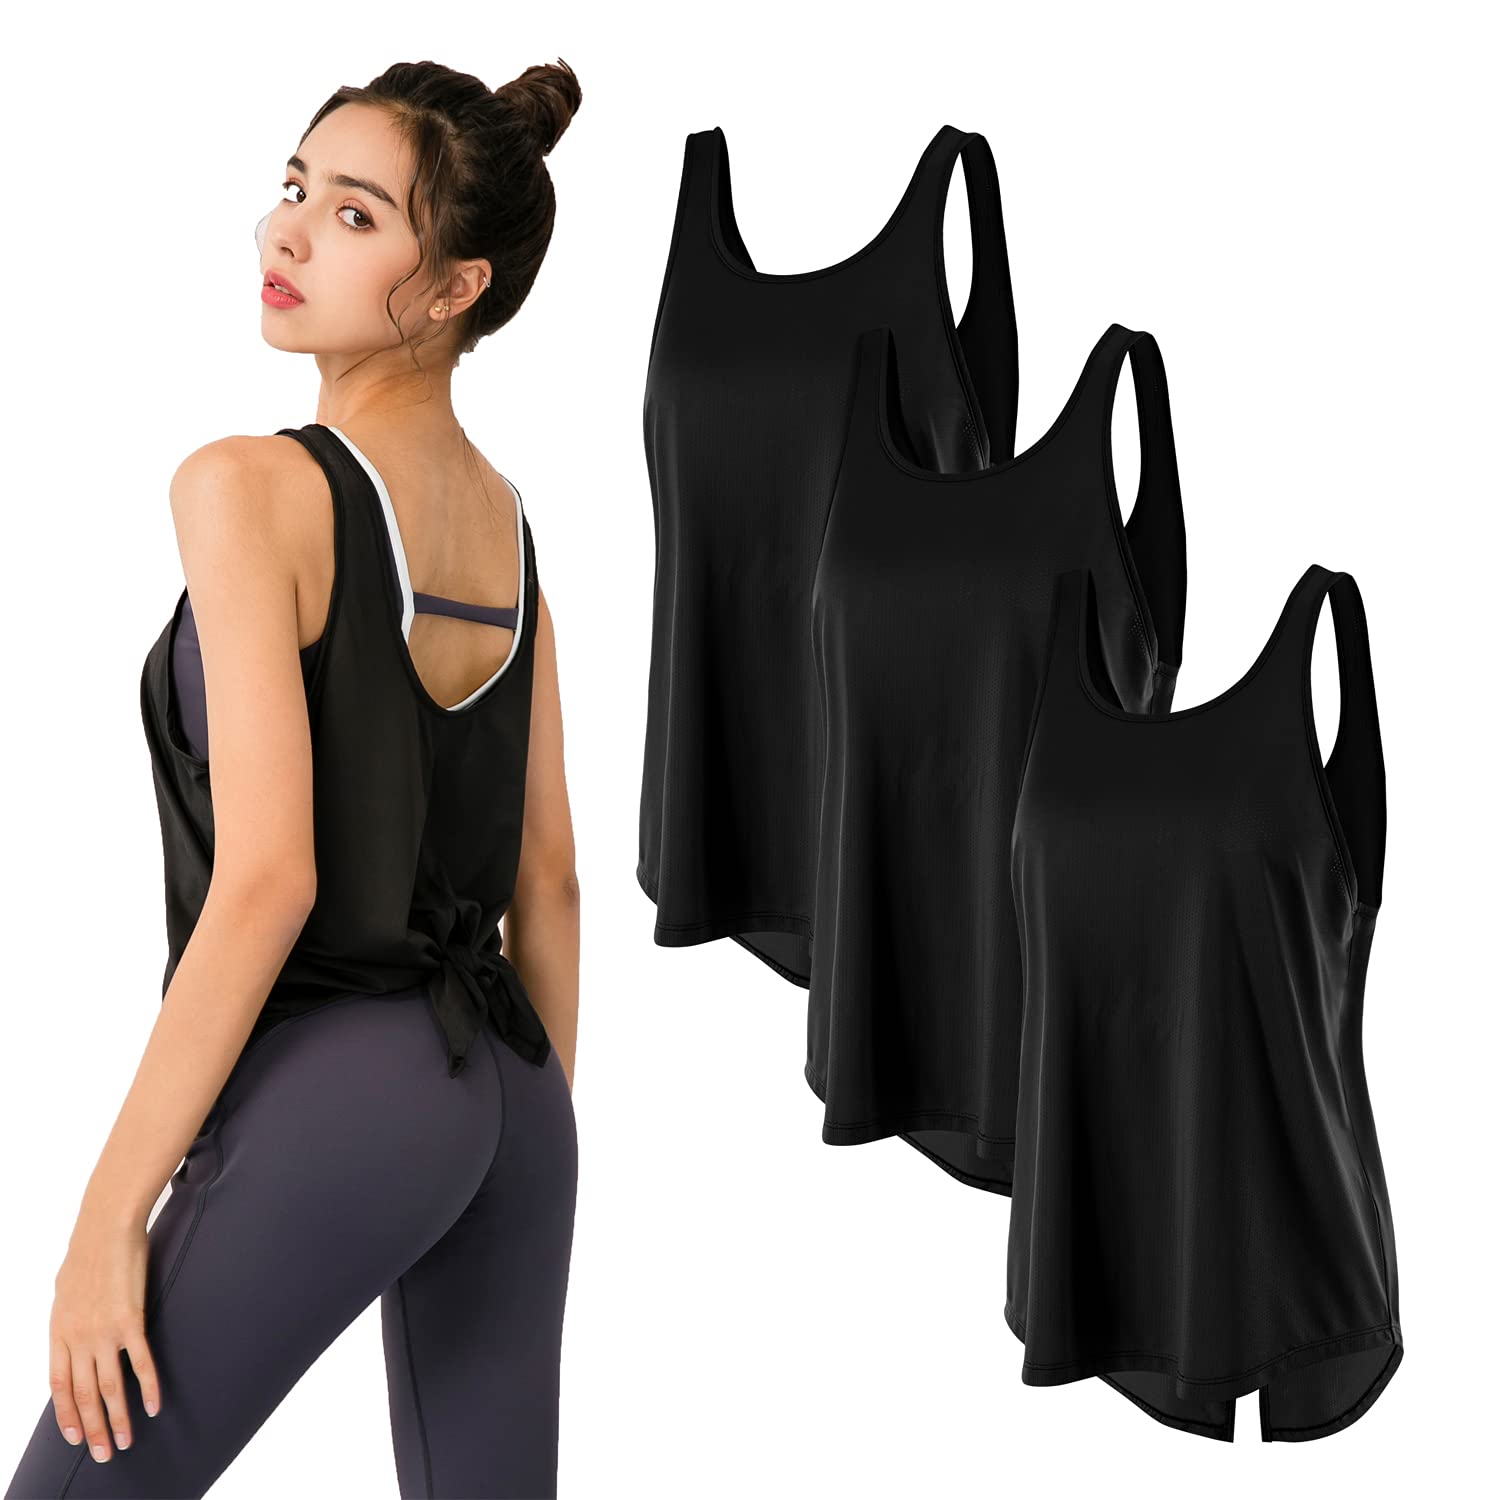 https://lanbaosi.net/cdn/shop/products/3-Pack-Workout-Tank-Tops-for-Women-Gym-Exercise-Athletic-Yoga-Tops-Female-Sports-Shirts-LANBAOSI-202.jpg?v=1664001295&width=1500